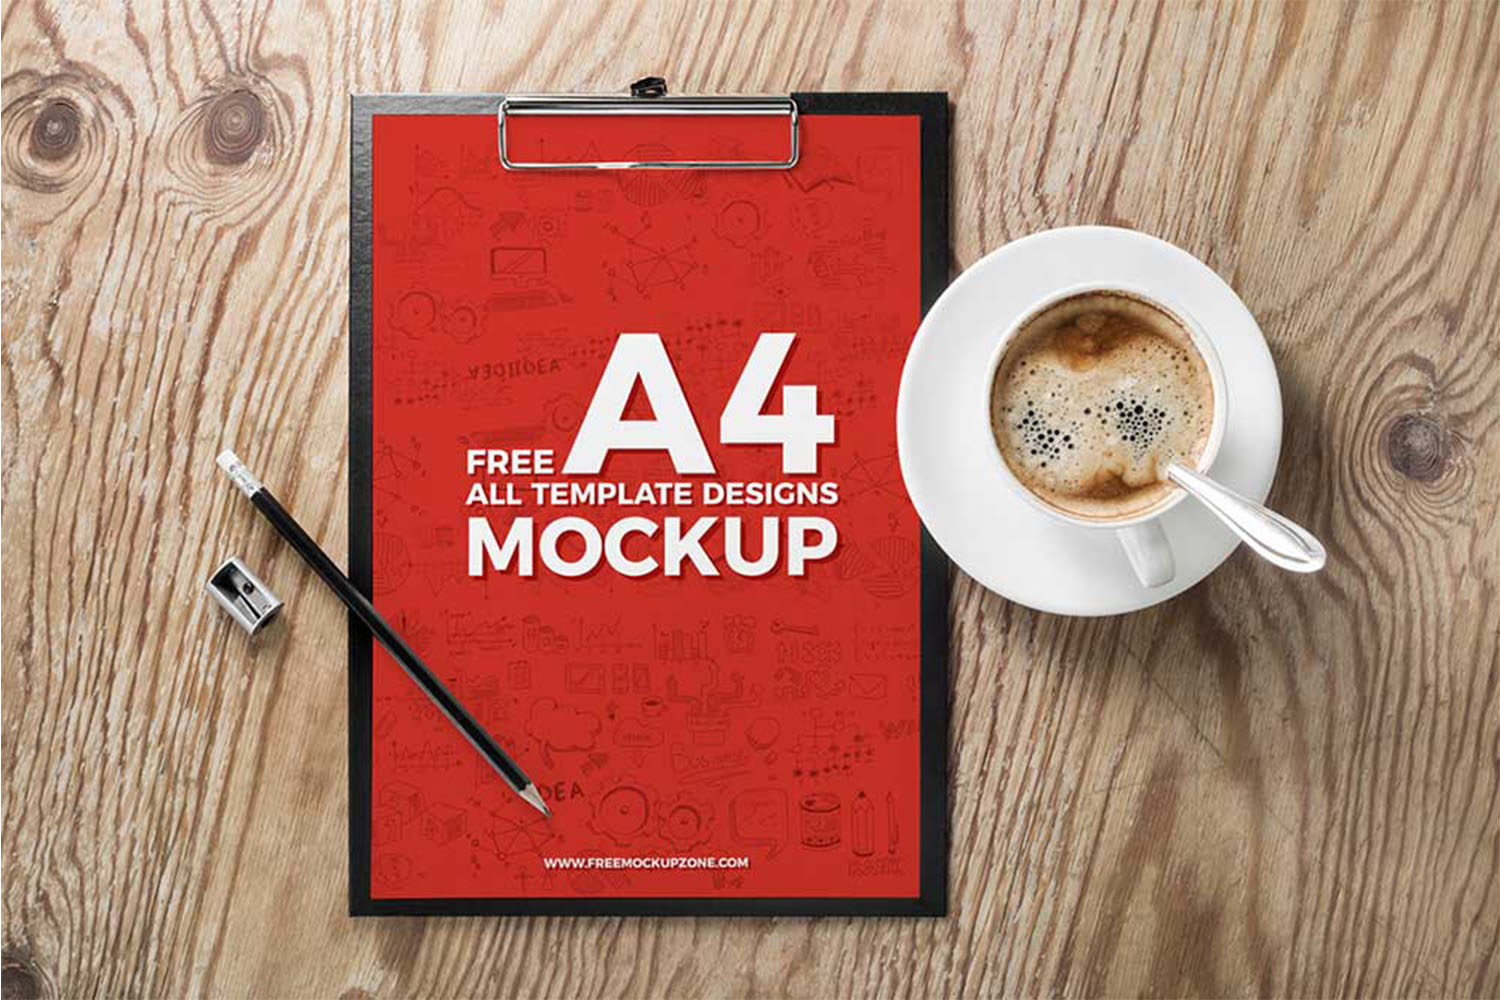 A4 Template Mockup free download